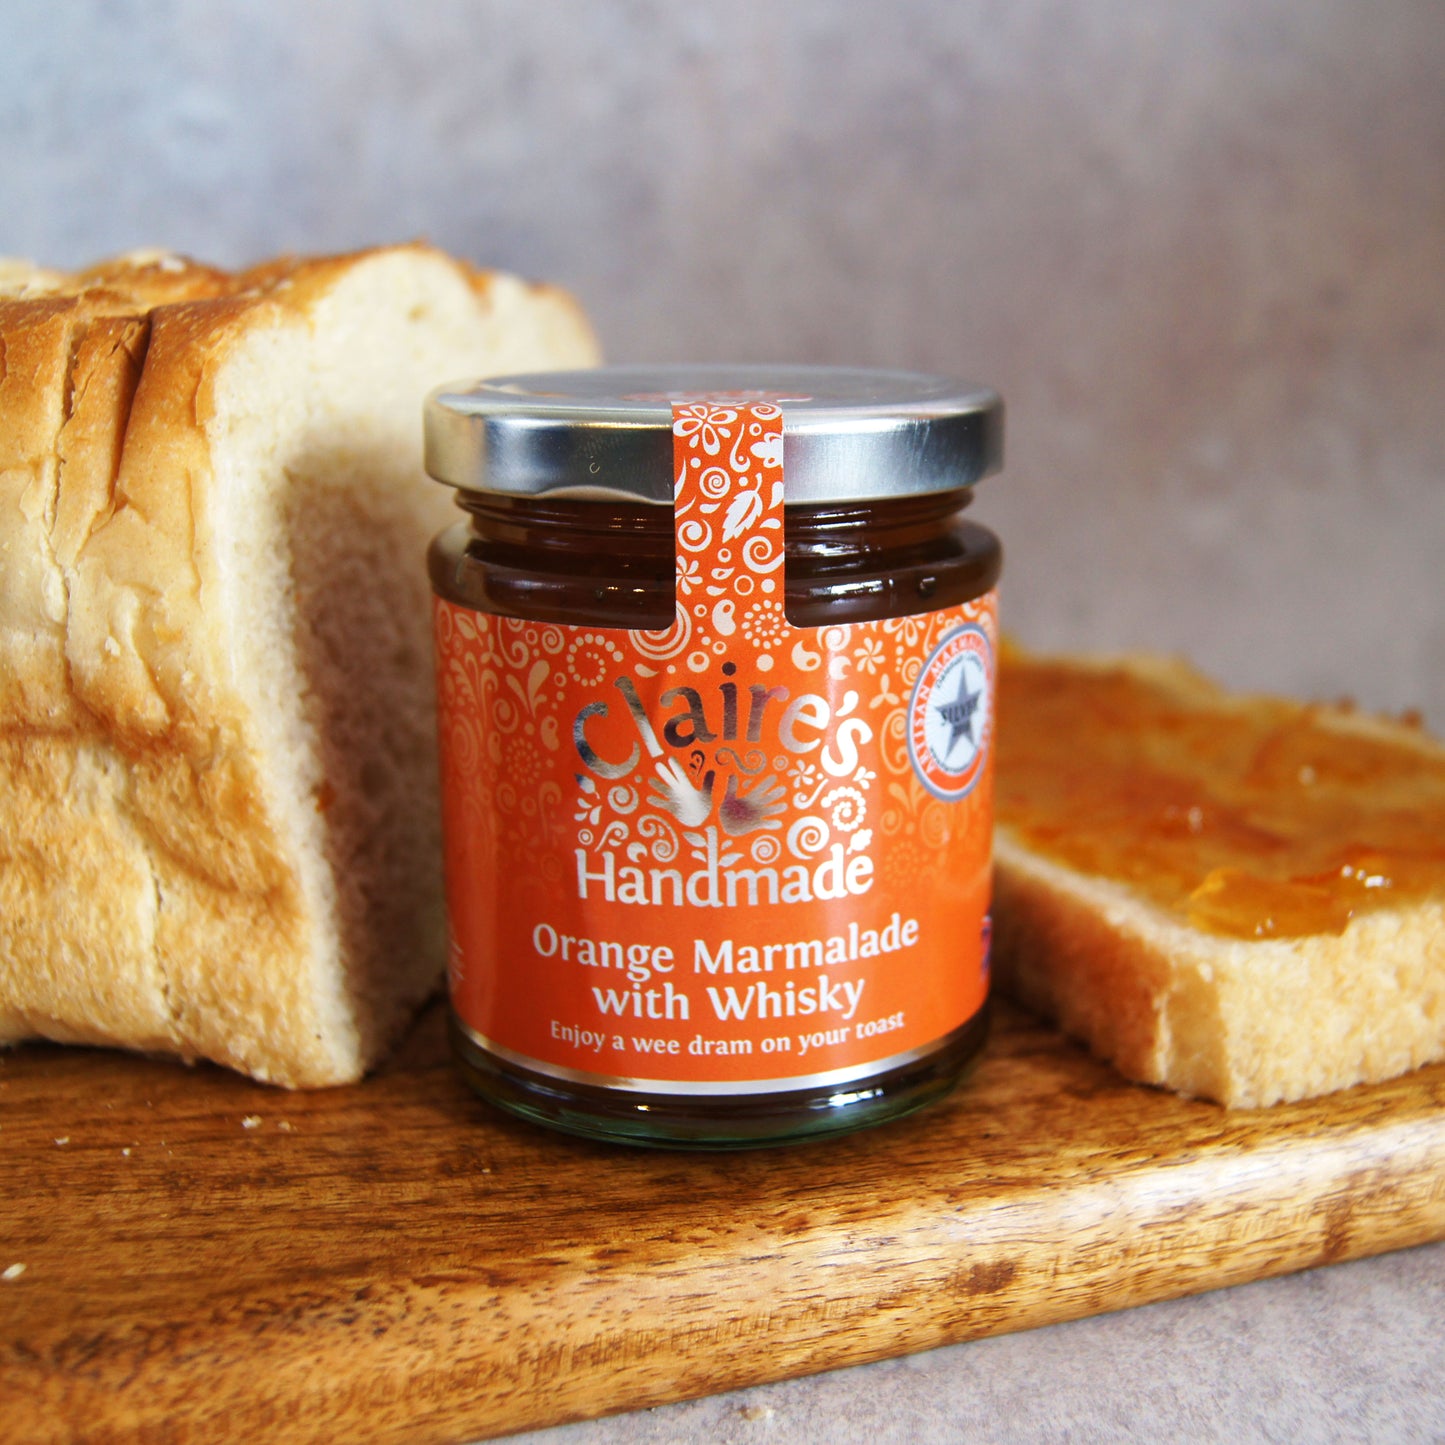 Claire's Handmade Orange Marmalade with Whisky 227g